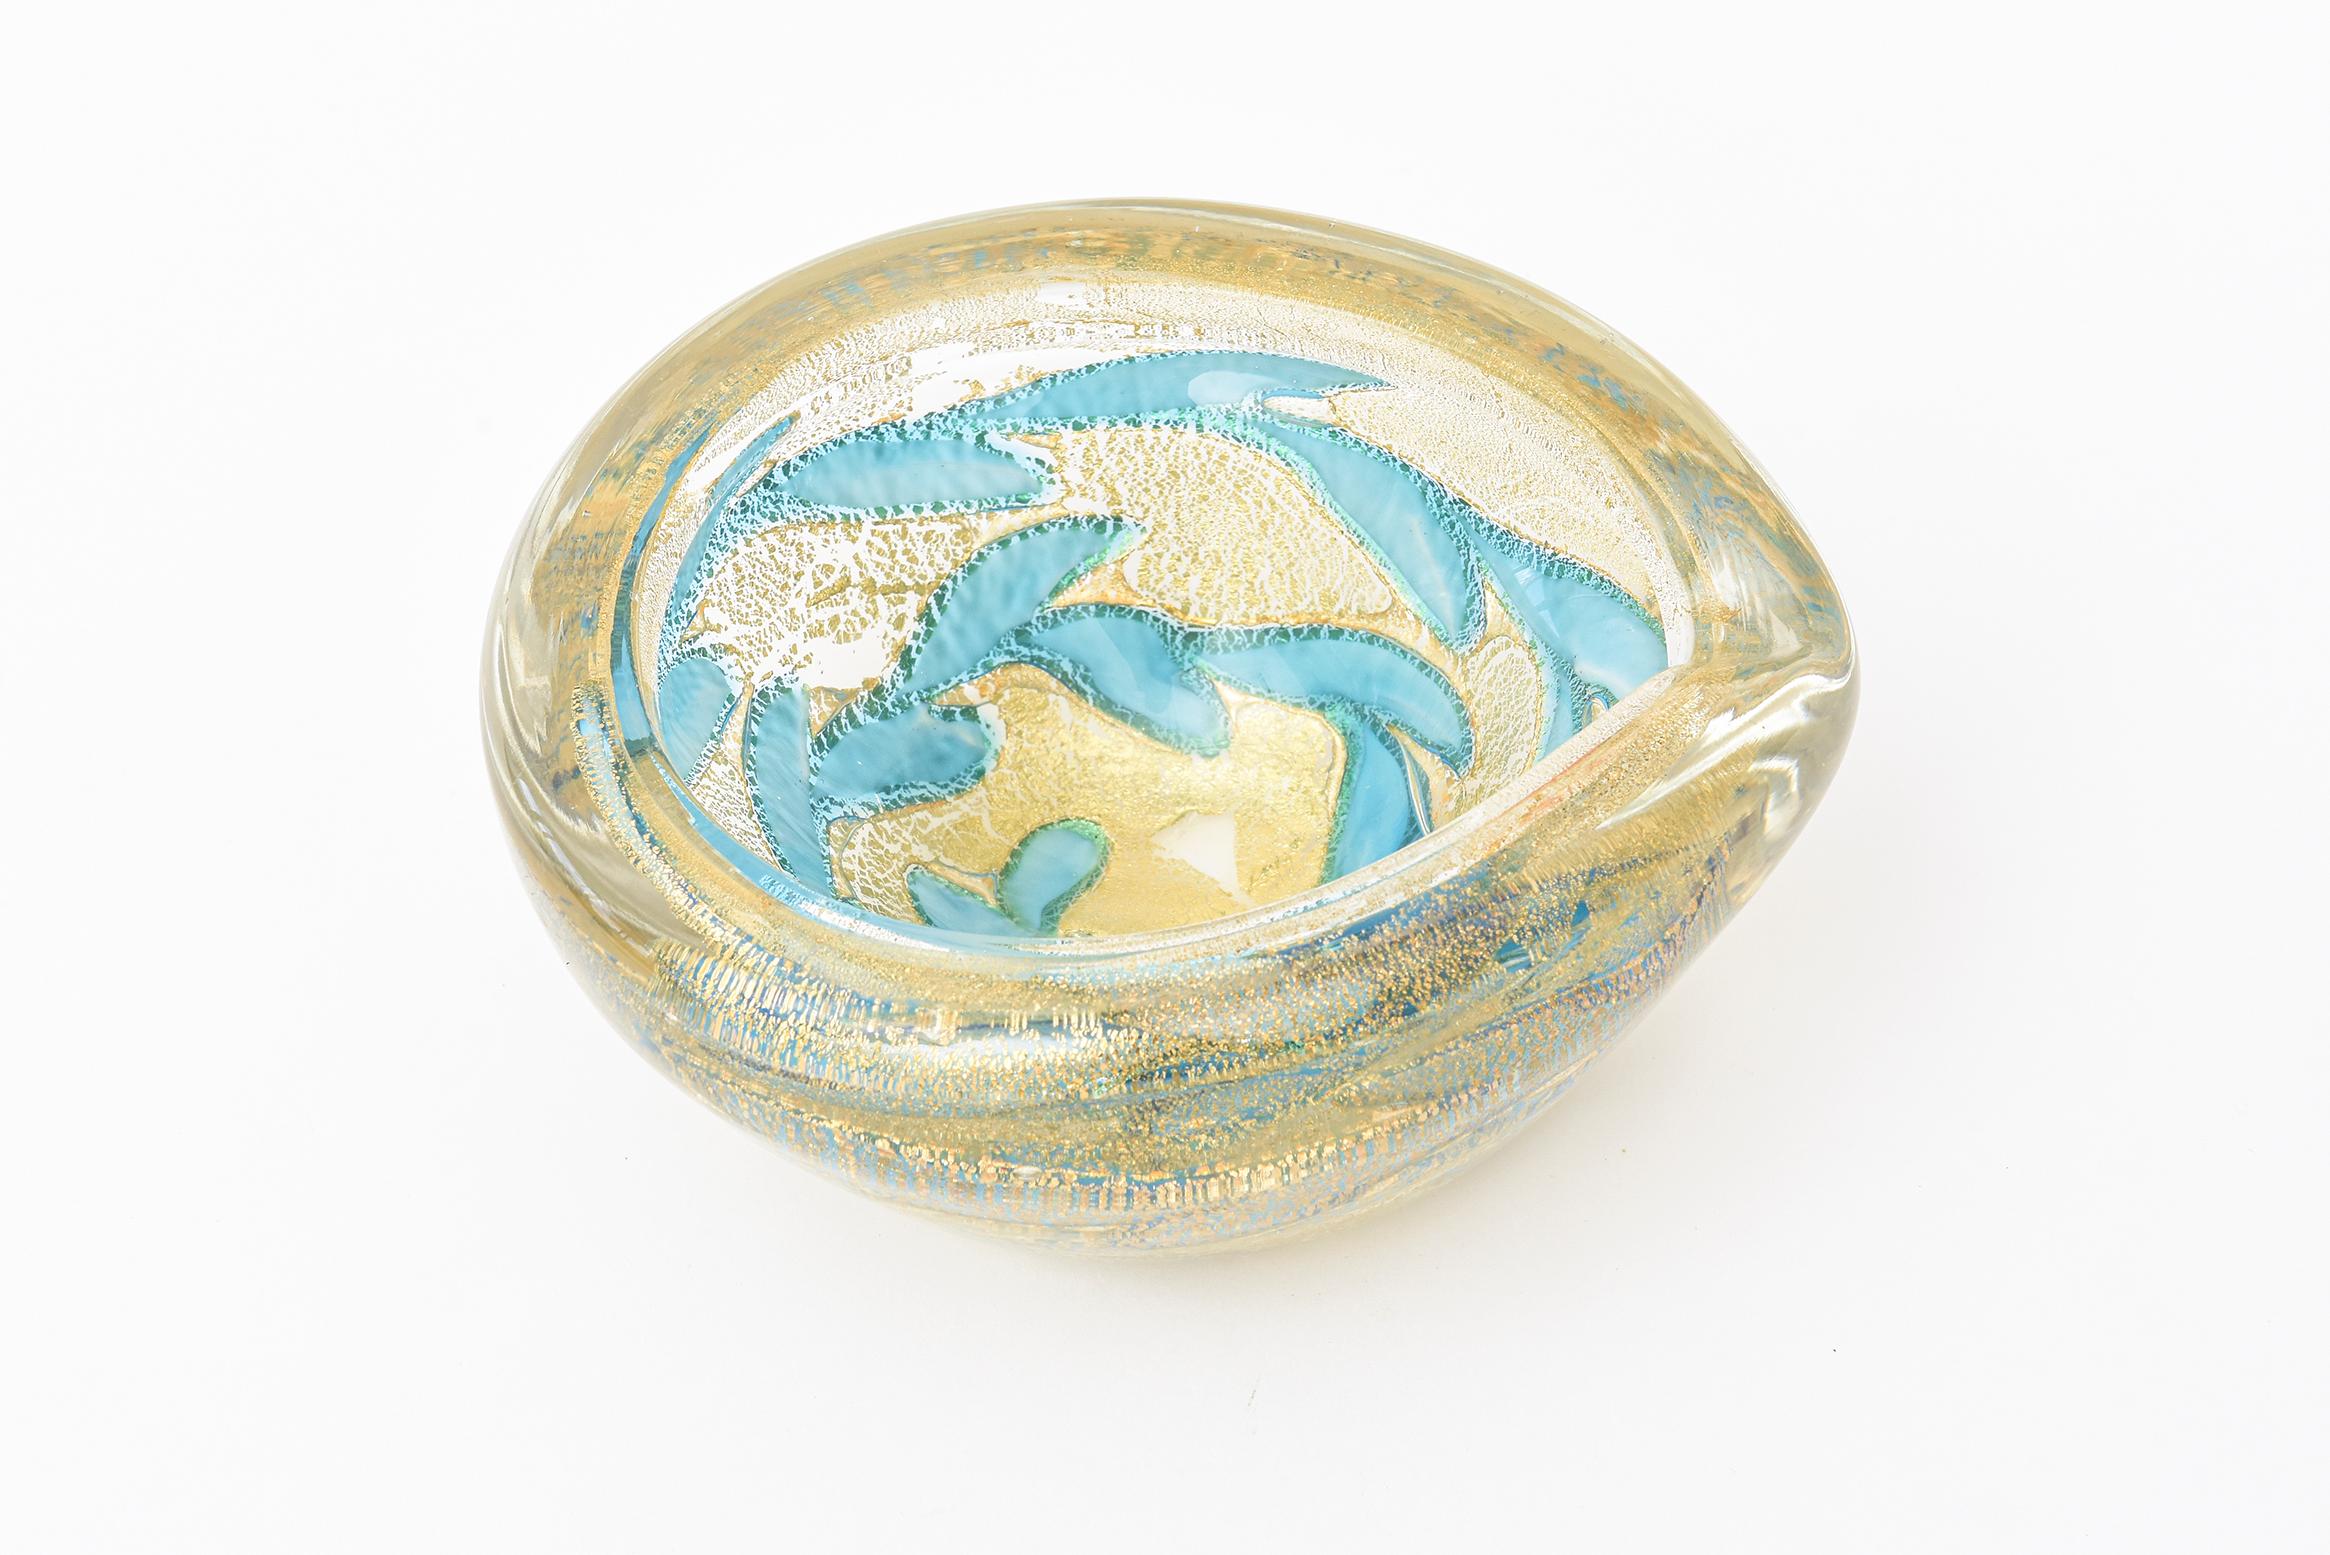 This absolutely stunning and unusual Italian Barovier e Toso Murano glass bowl is filled with abstract segments of blown turquoise powder splattered painterly in the glass mixed with abundant gold aventurine. An abstract design has come from this